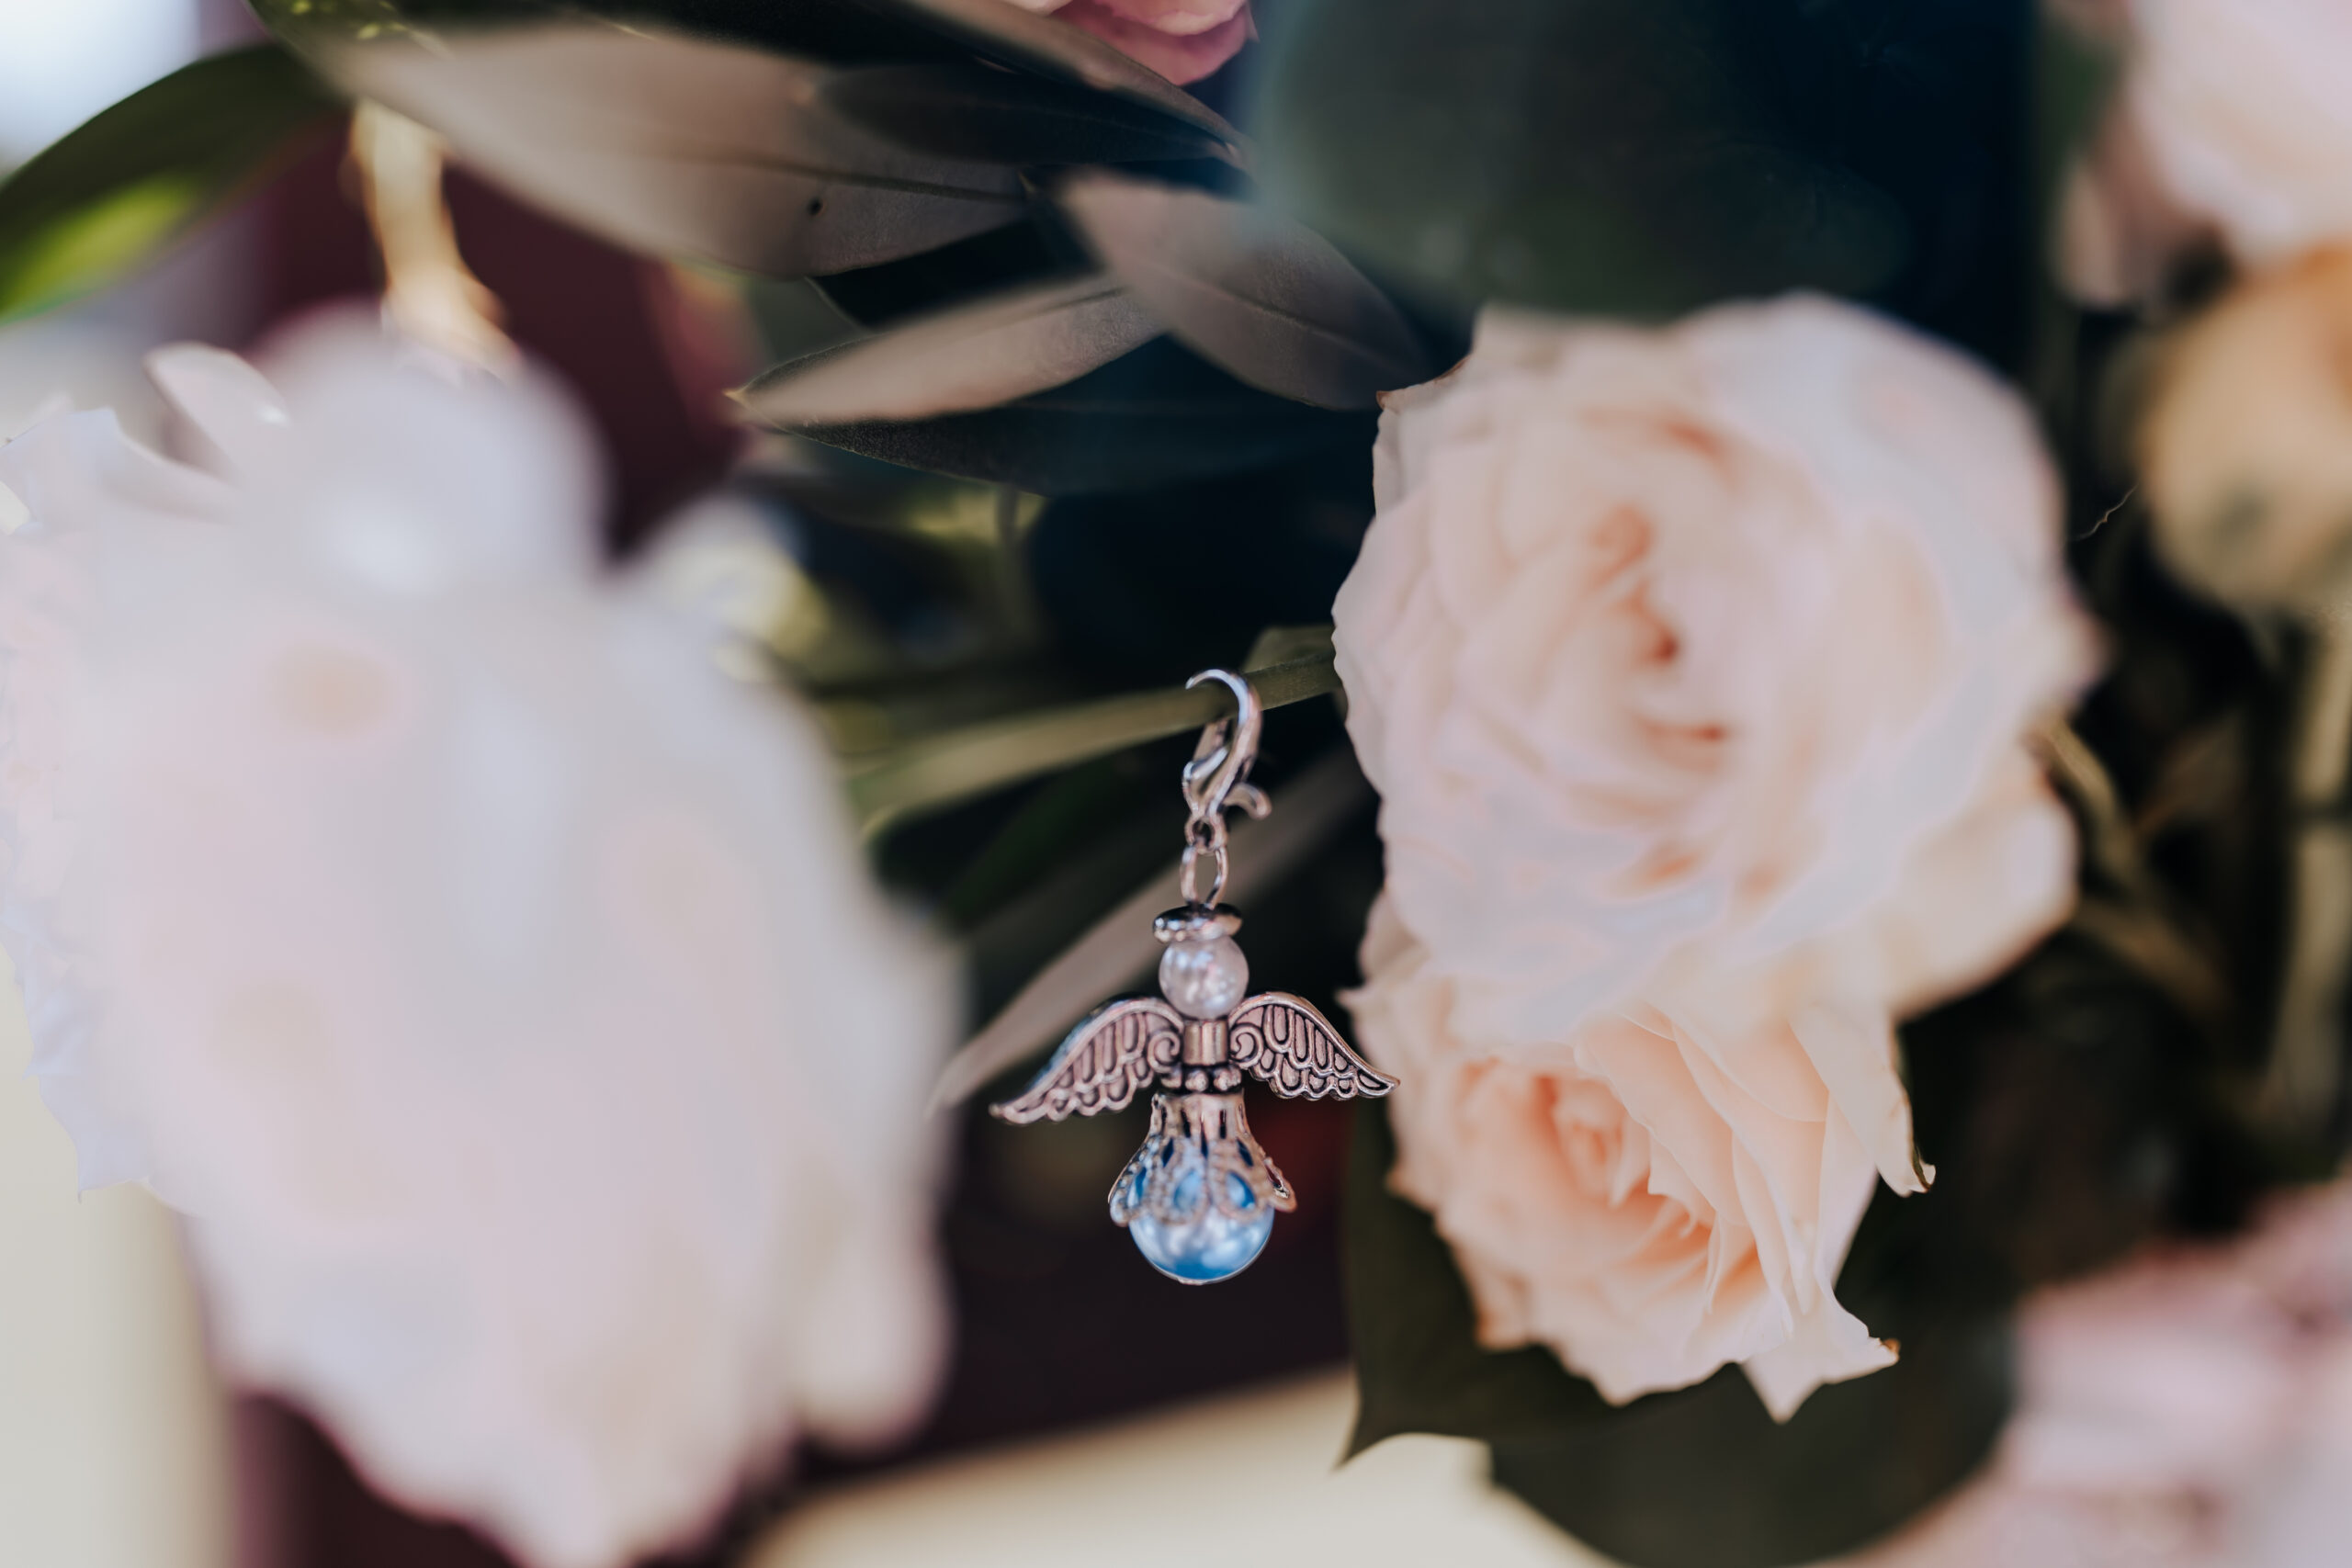 Nashville elopement photographer captures boutonniere charm honoring loved one